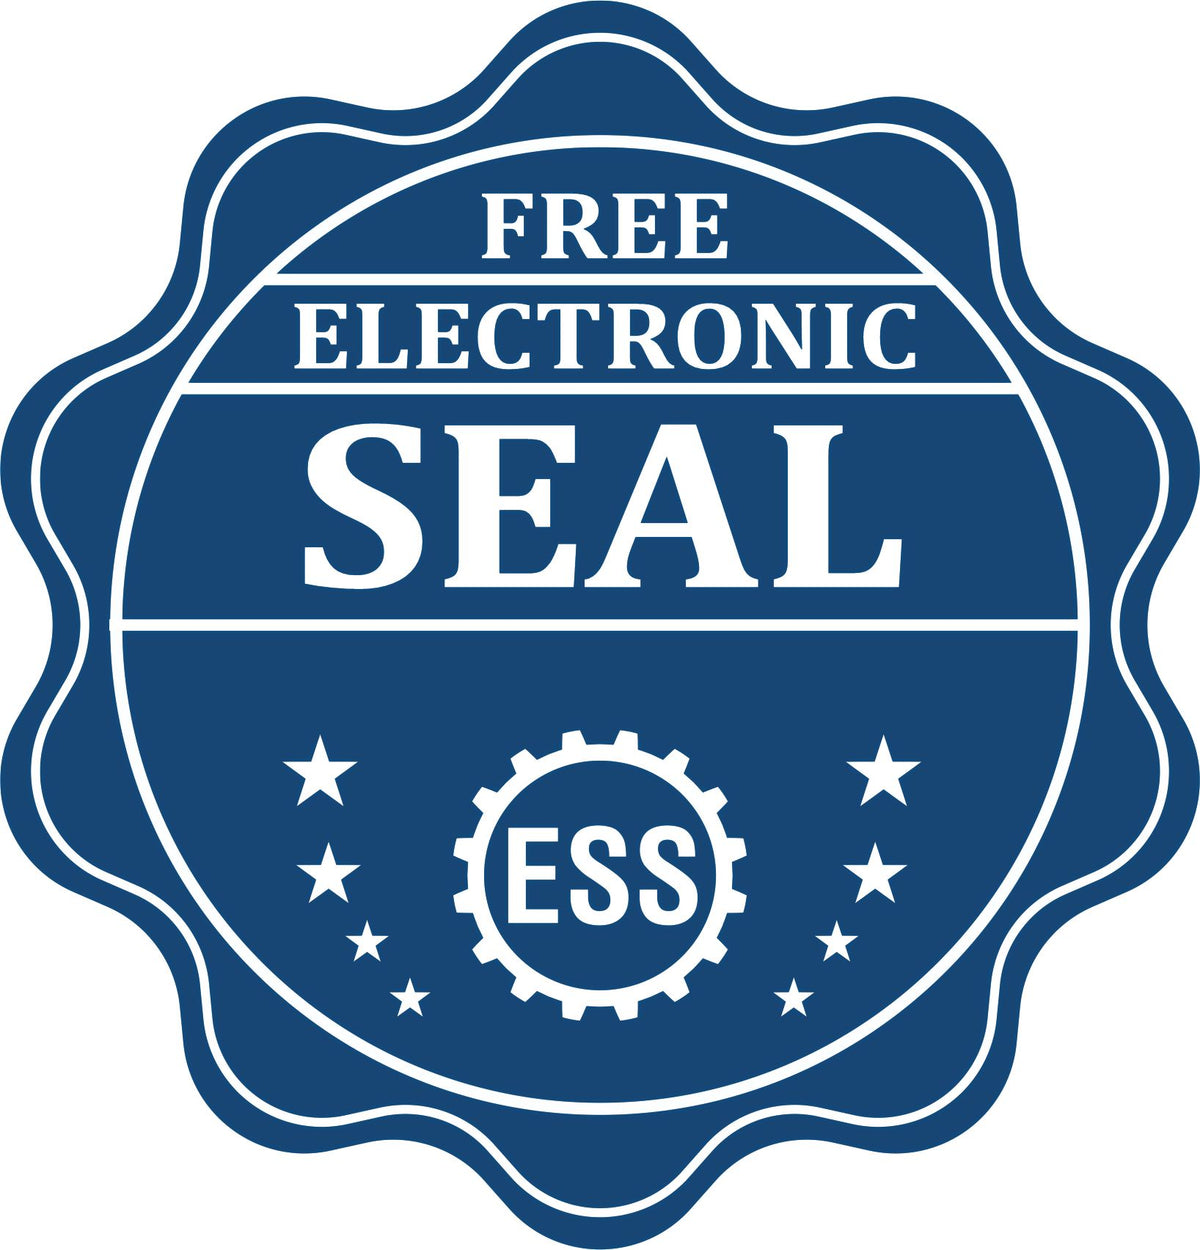 A badge showing a free electronic seal for the Handheld Maryland Architect Seal Embosser with stars and the ESS gear on the emblem.